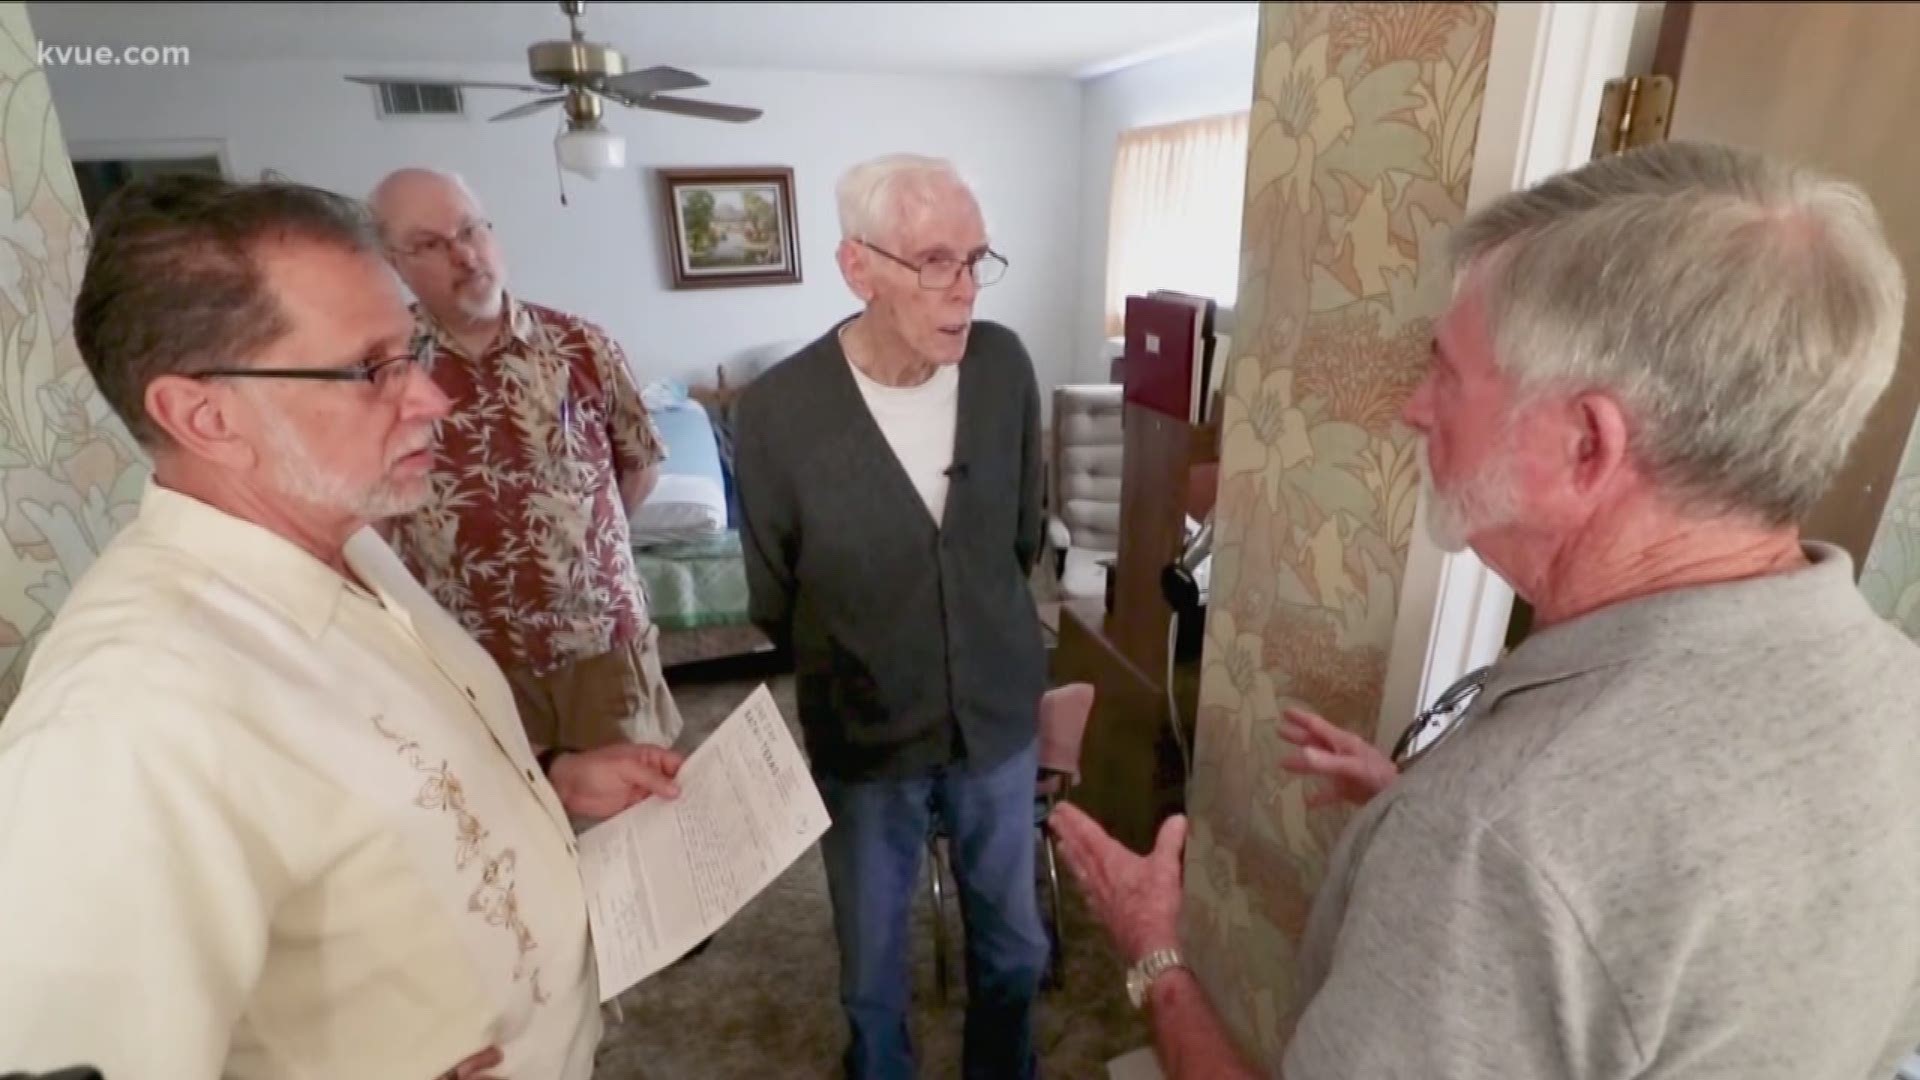 A World War II veteran will have a safer home thanks to the KVUE Defenders.